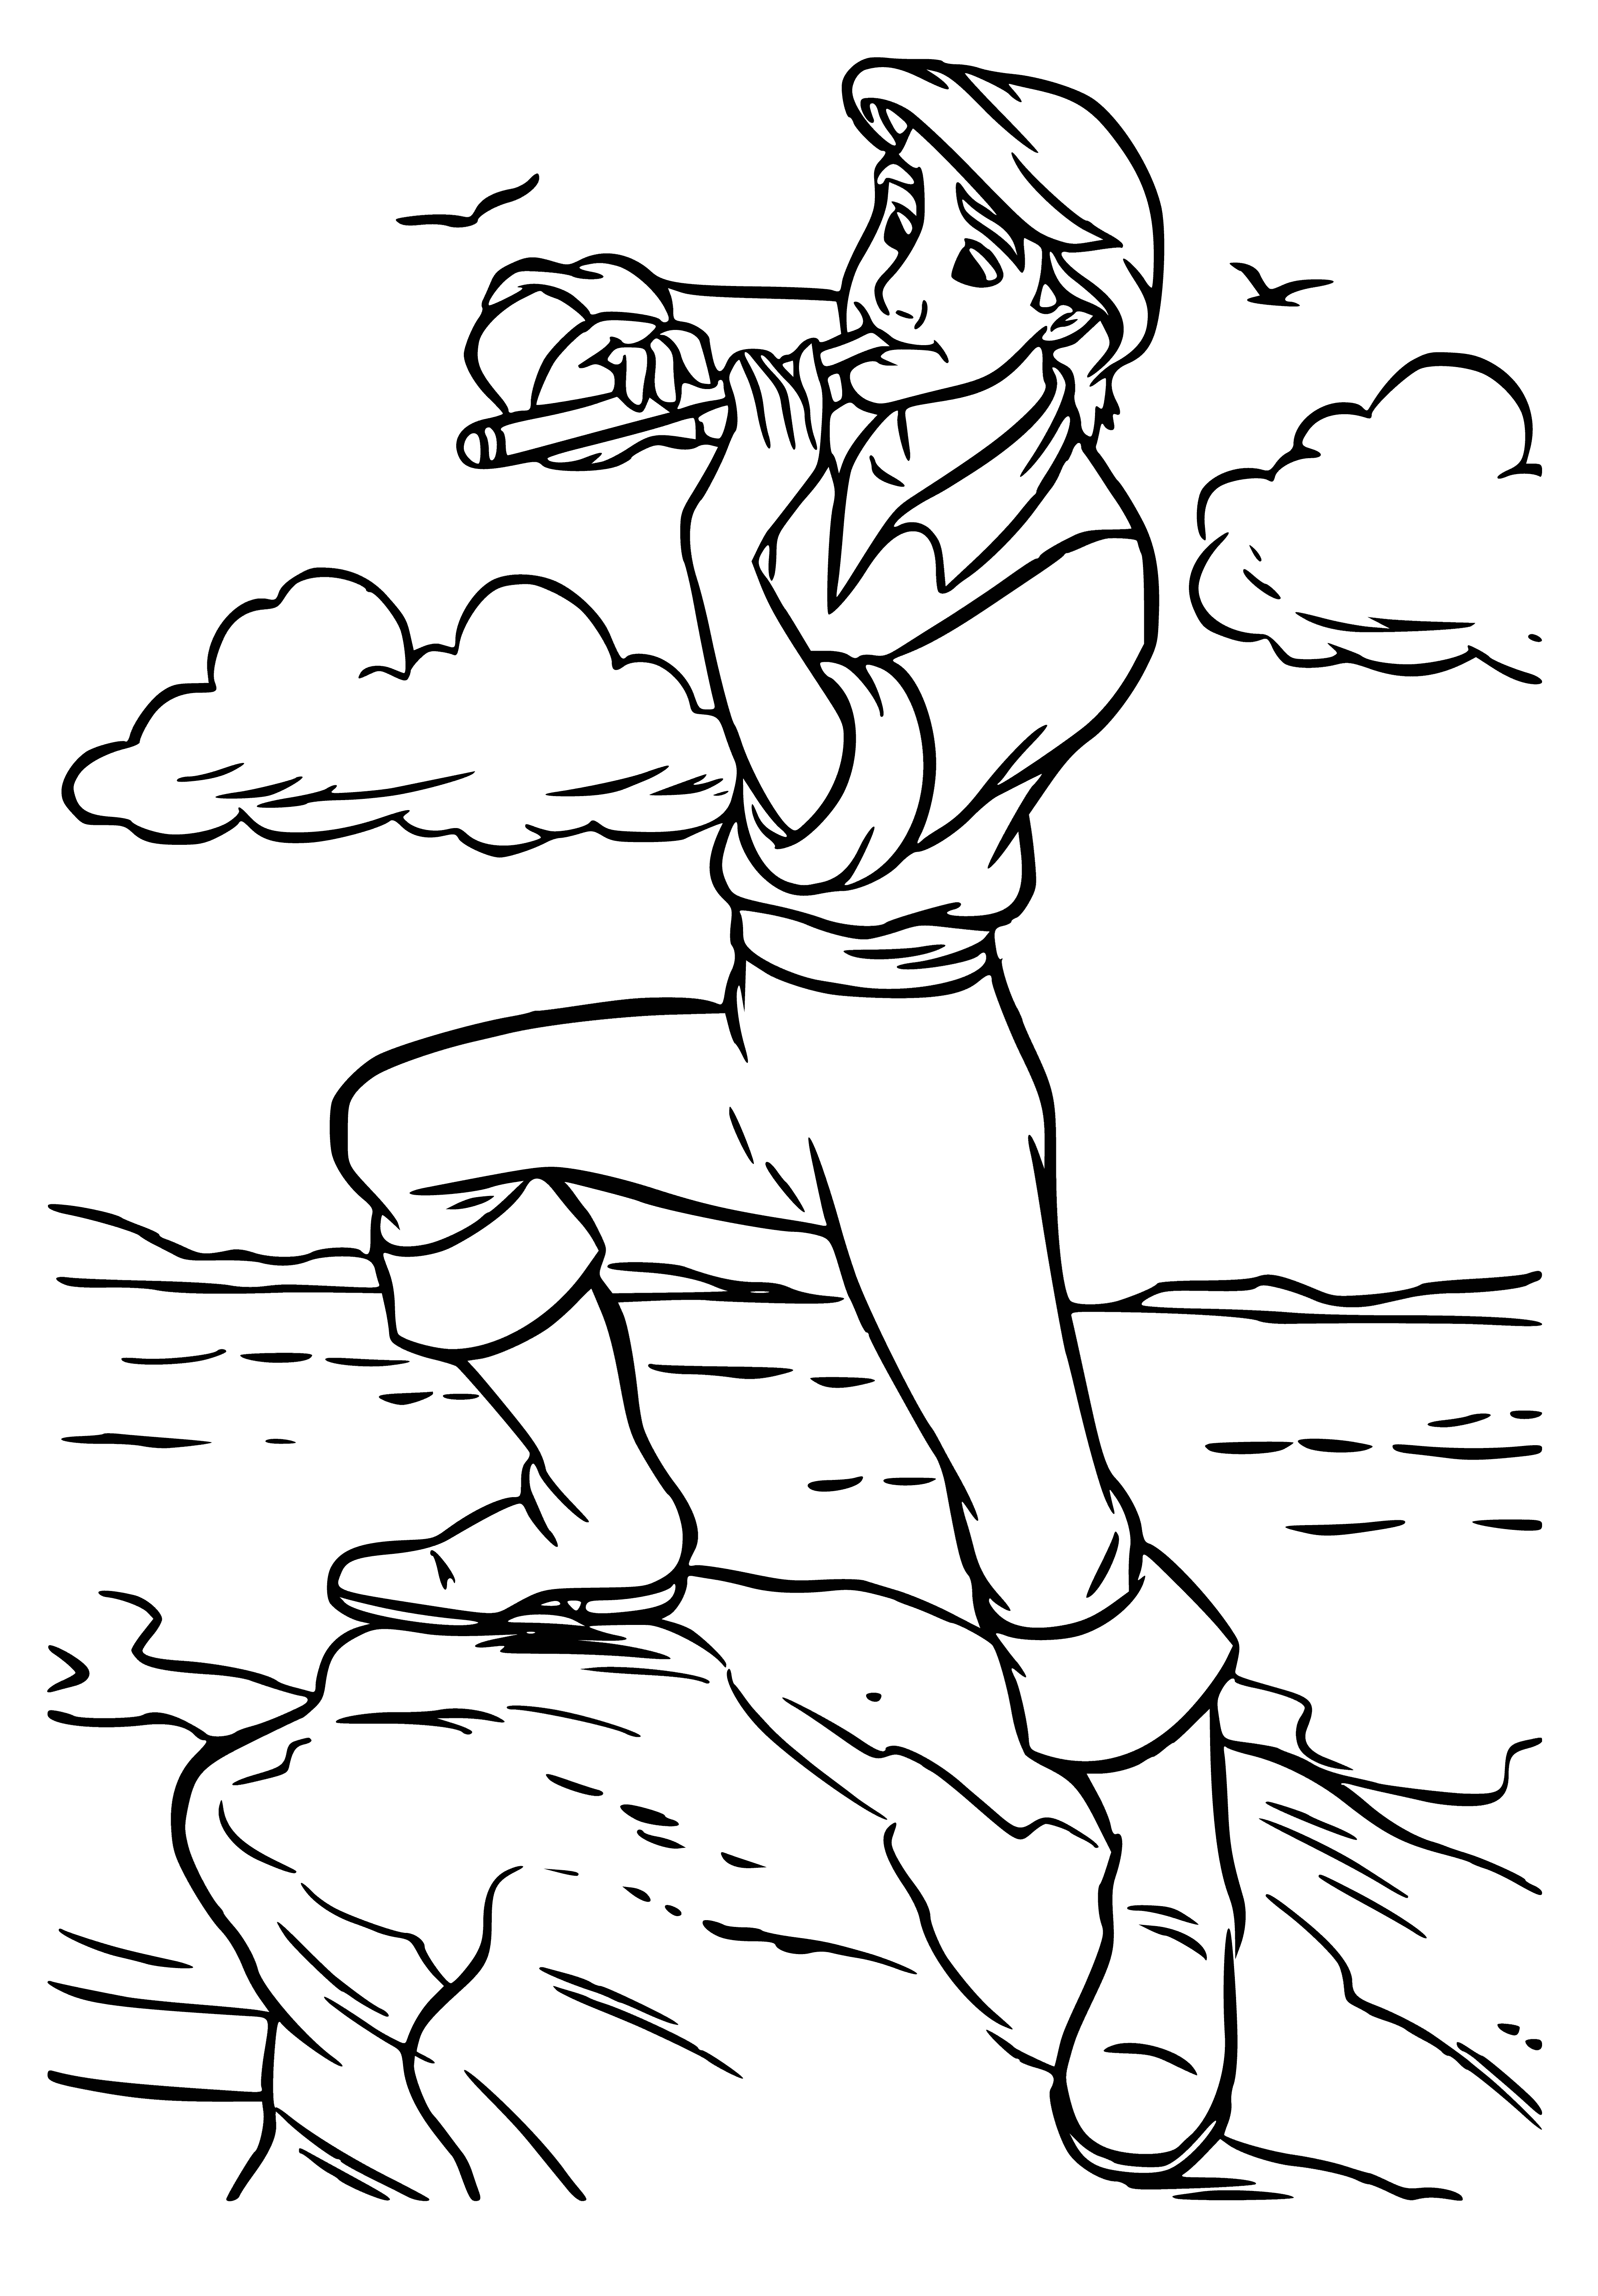 The prince plays the flute coloring page